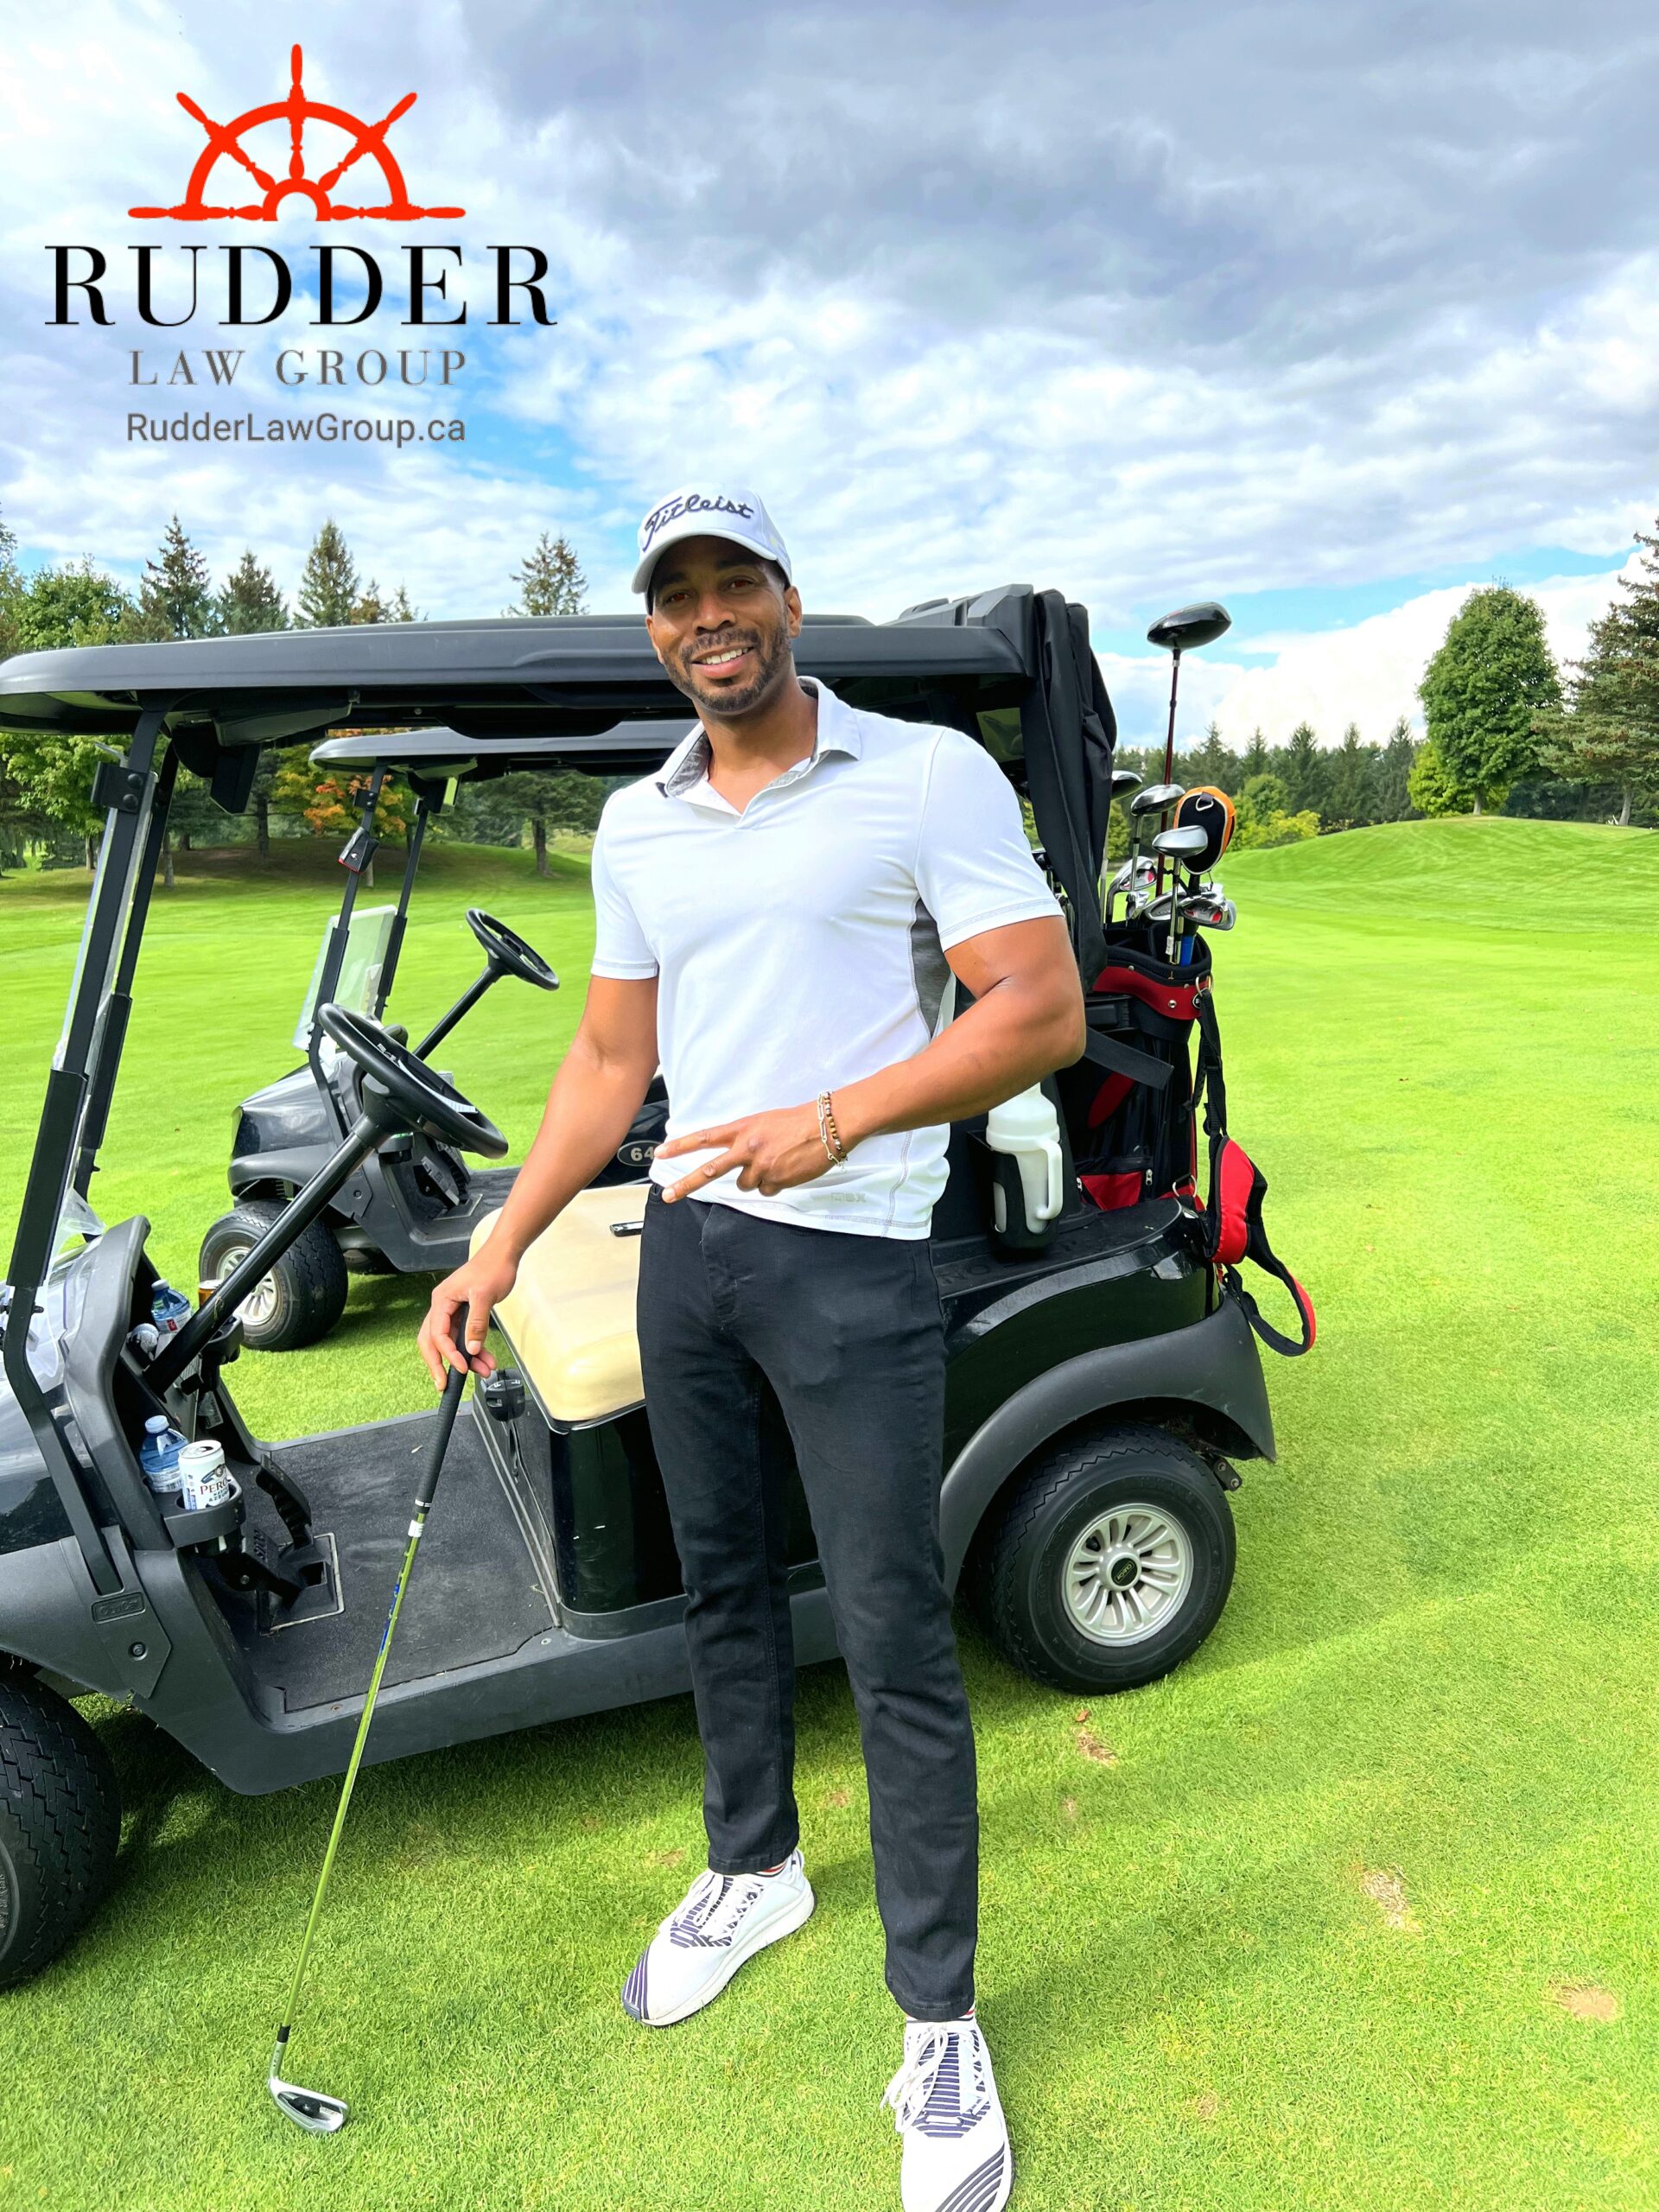 Mr. Andrew Leroy Rudder was happy to participate in this charity event — The Drive for ABI Golf Tournament — at the Flamborough Hills Golf Club last Monday, to raise money for the Hamilton Brain Injury Association, which is a reputable non-profit organization that’s dedicated to making a positive impact in the lives of brain injury survivors.